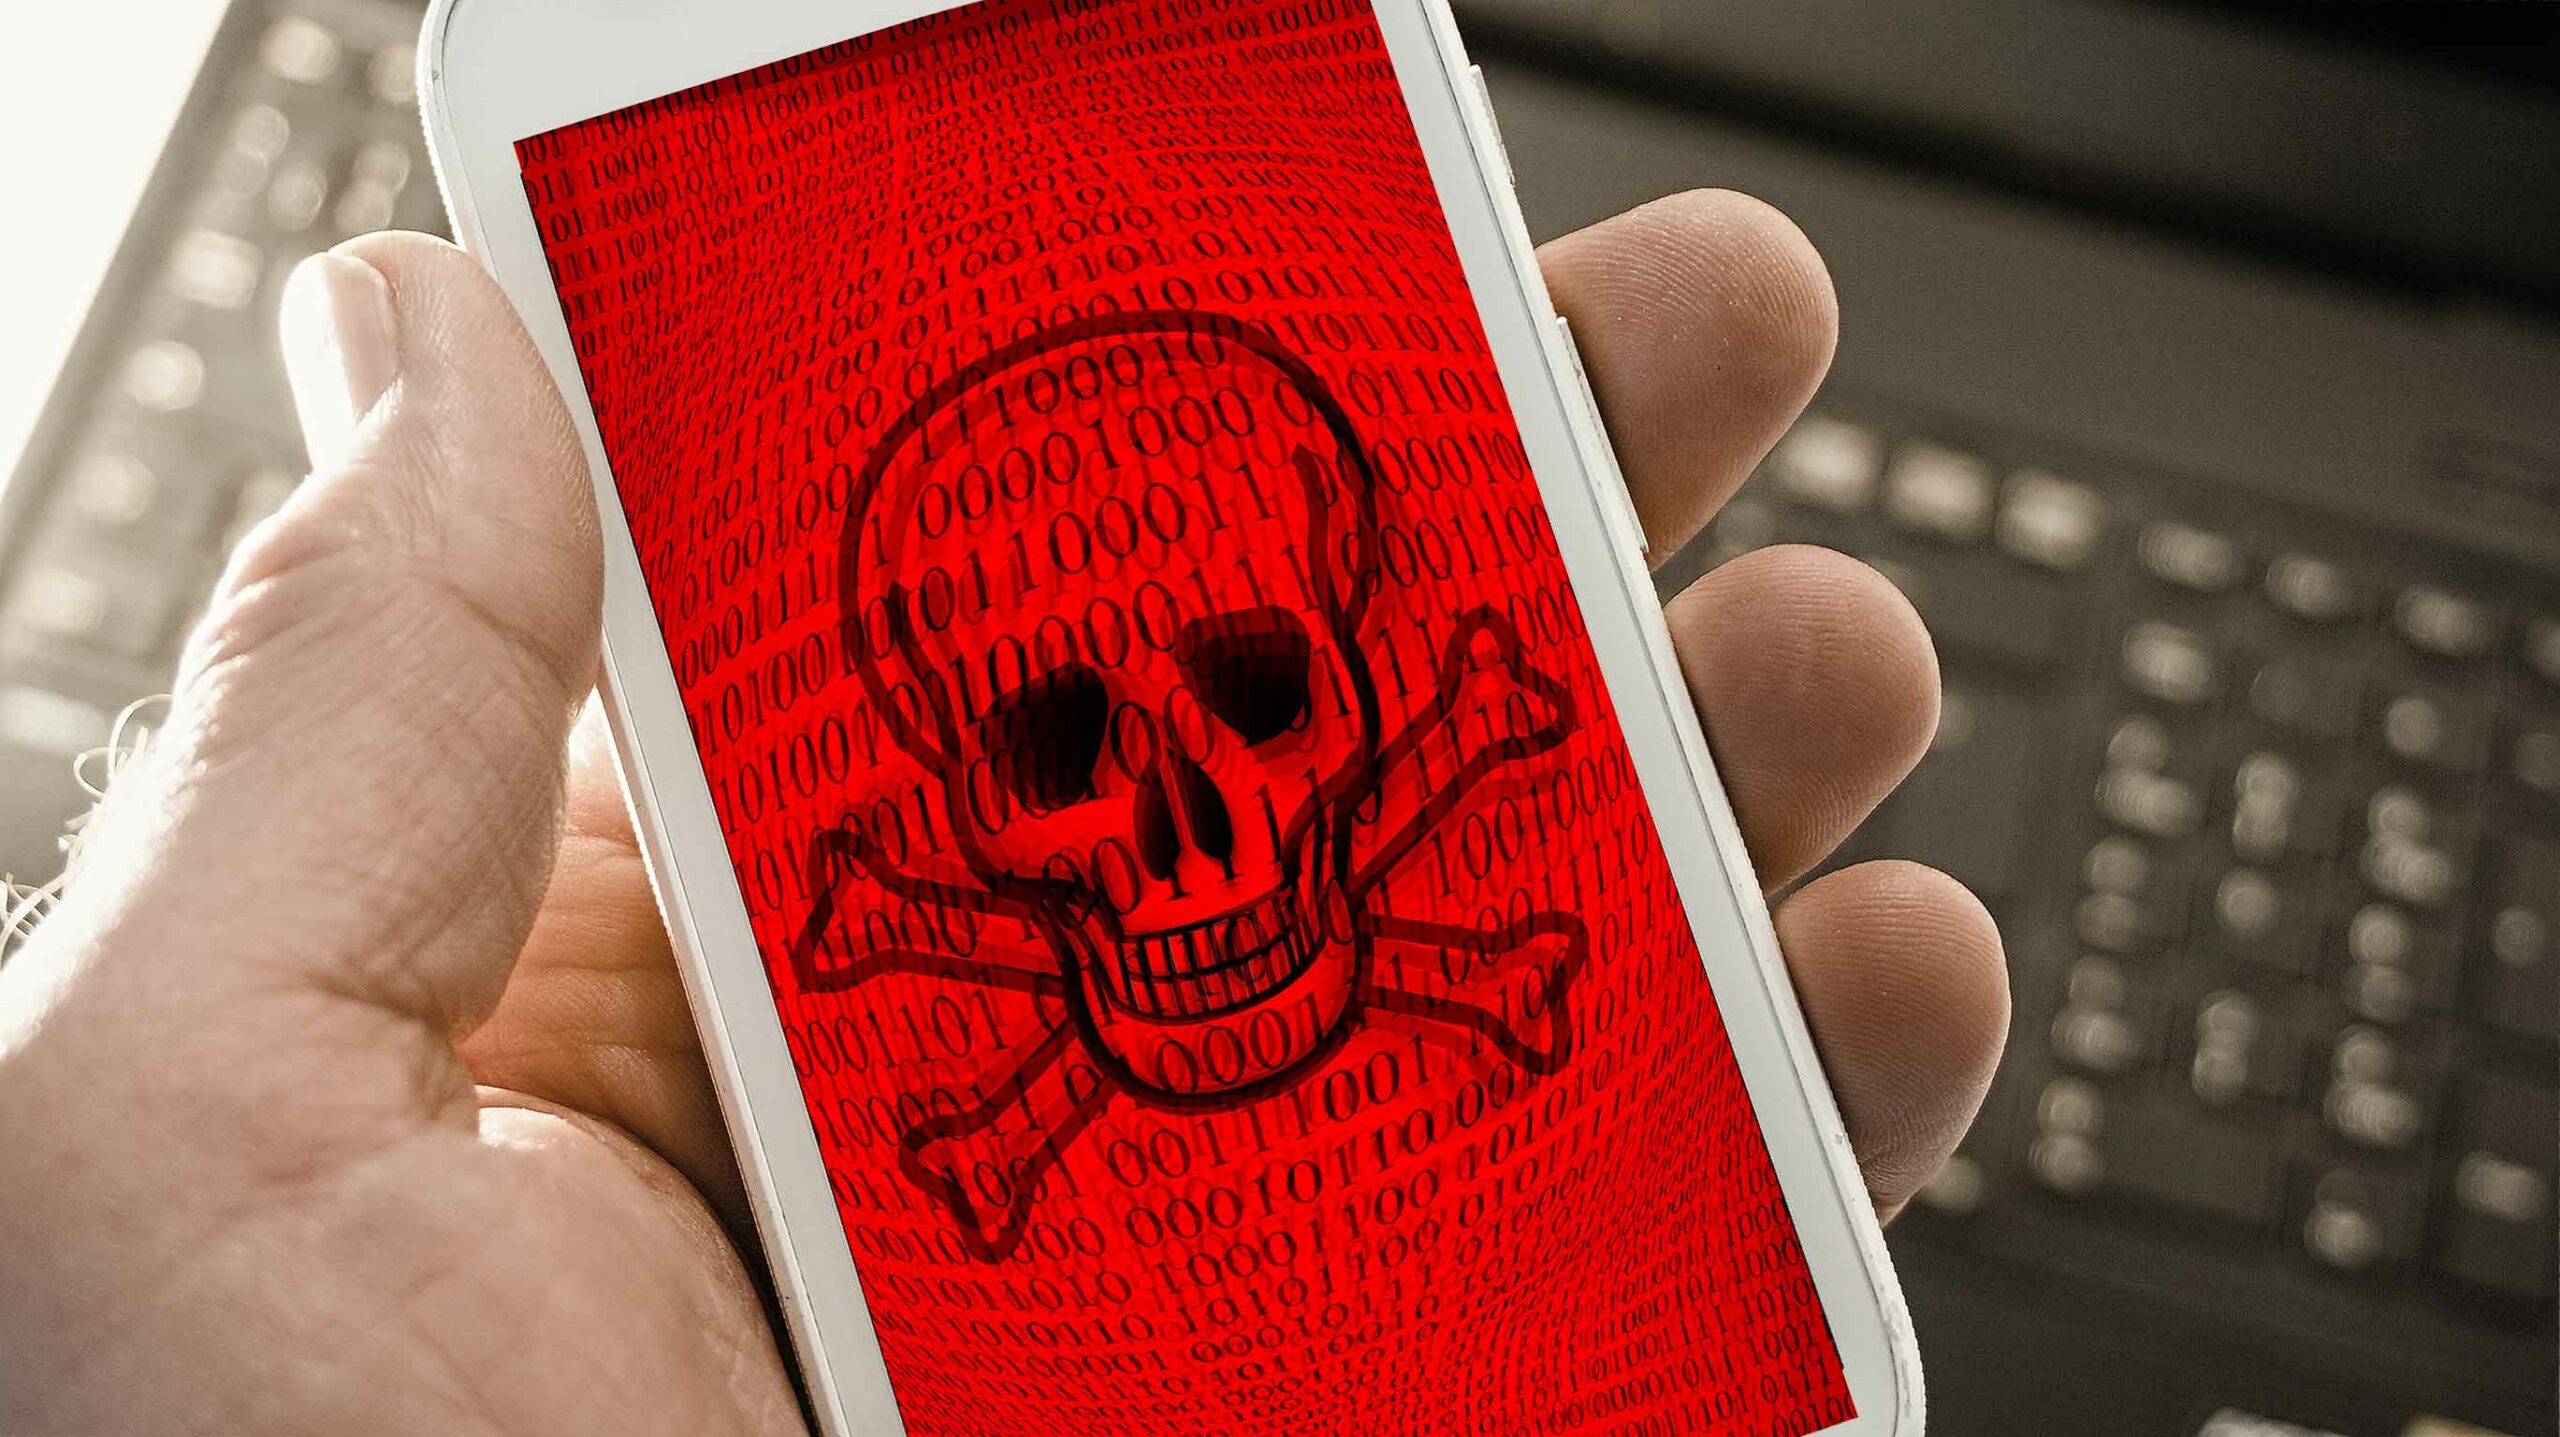 Apps with over 420 Million downloads from Google Play unveil the discovery of SpinOk spyware